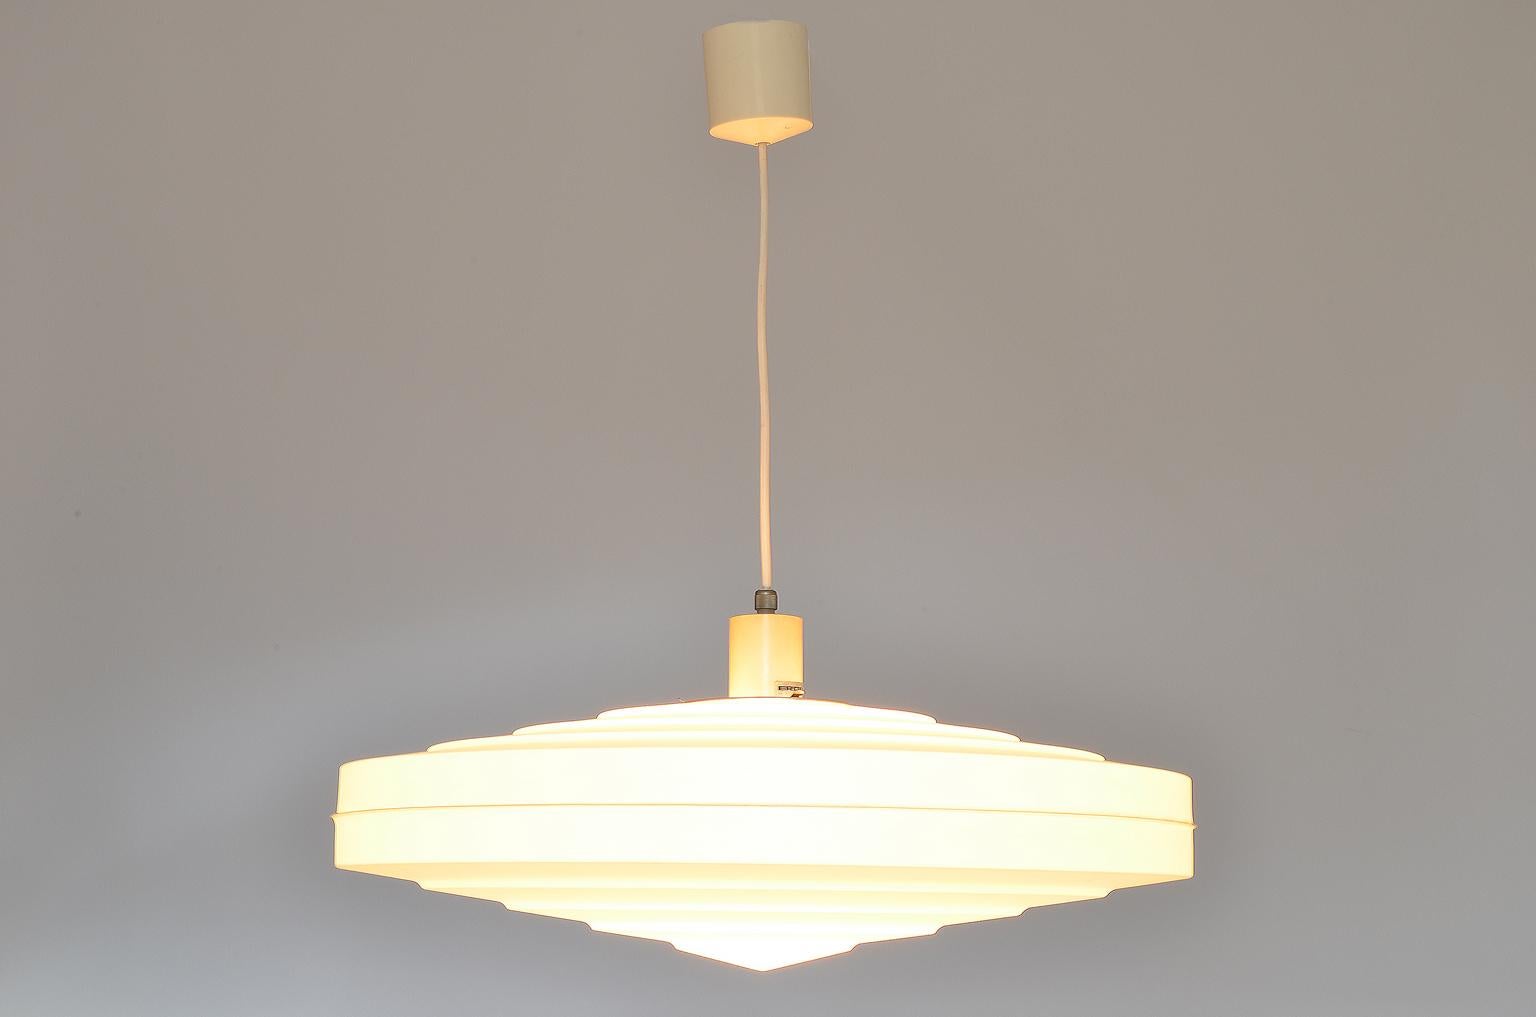 White pendant / ceiling Lamp by Aloys F. Gangkofner for Erco Leuchten, Germany Lüdenscheid 1962s.
Measure of the lampshade: D55cm / H 17cm.